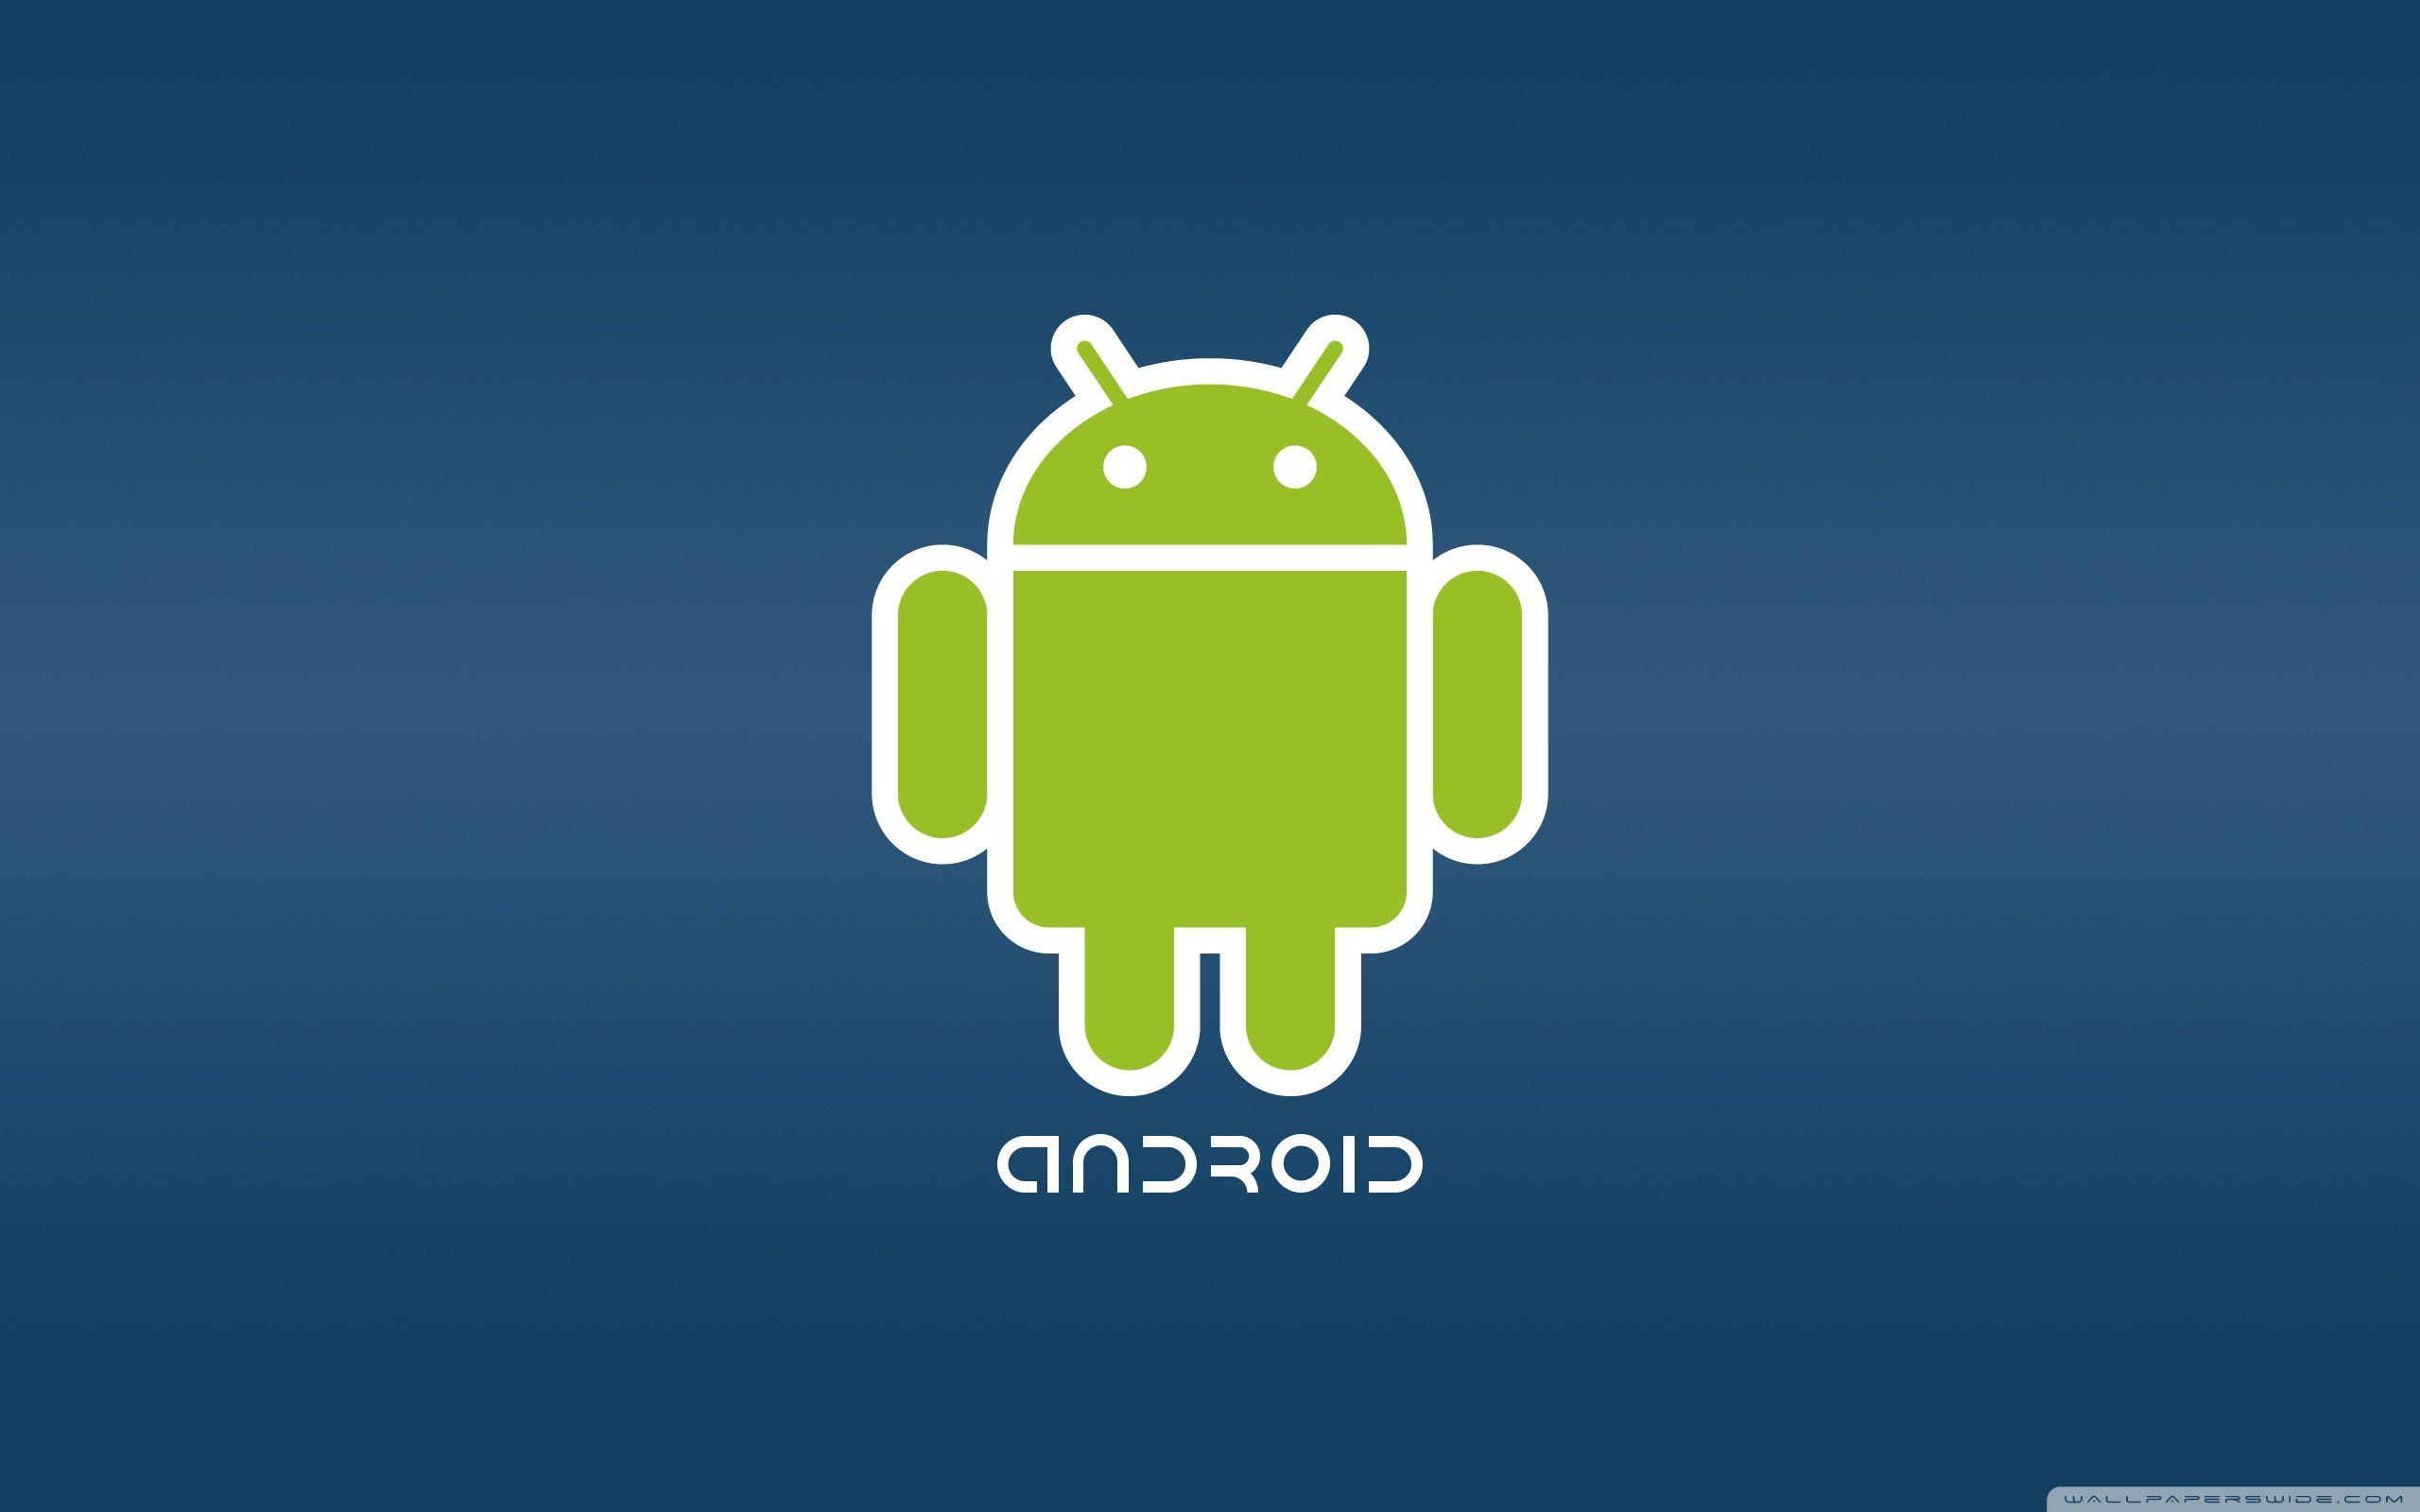 HD wallpaper Android Lover android logo funny android logo android   Wallpaper Flare